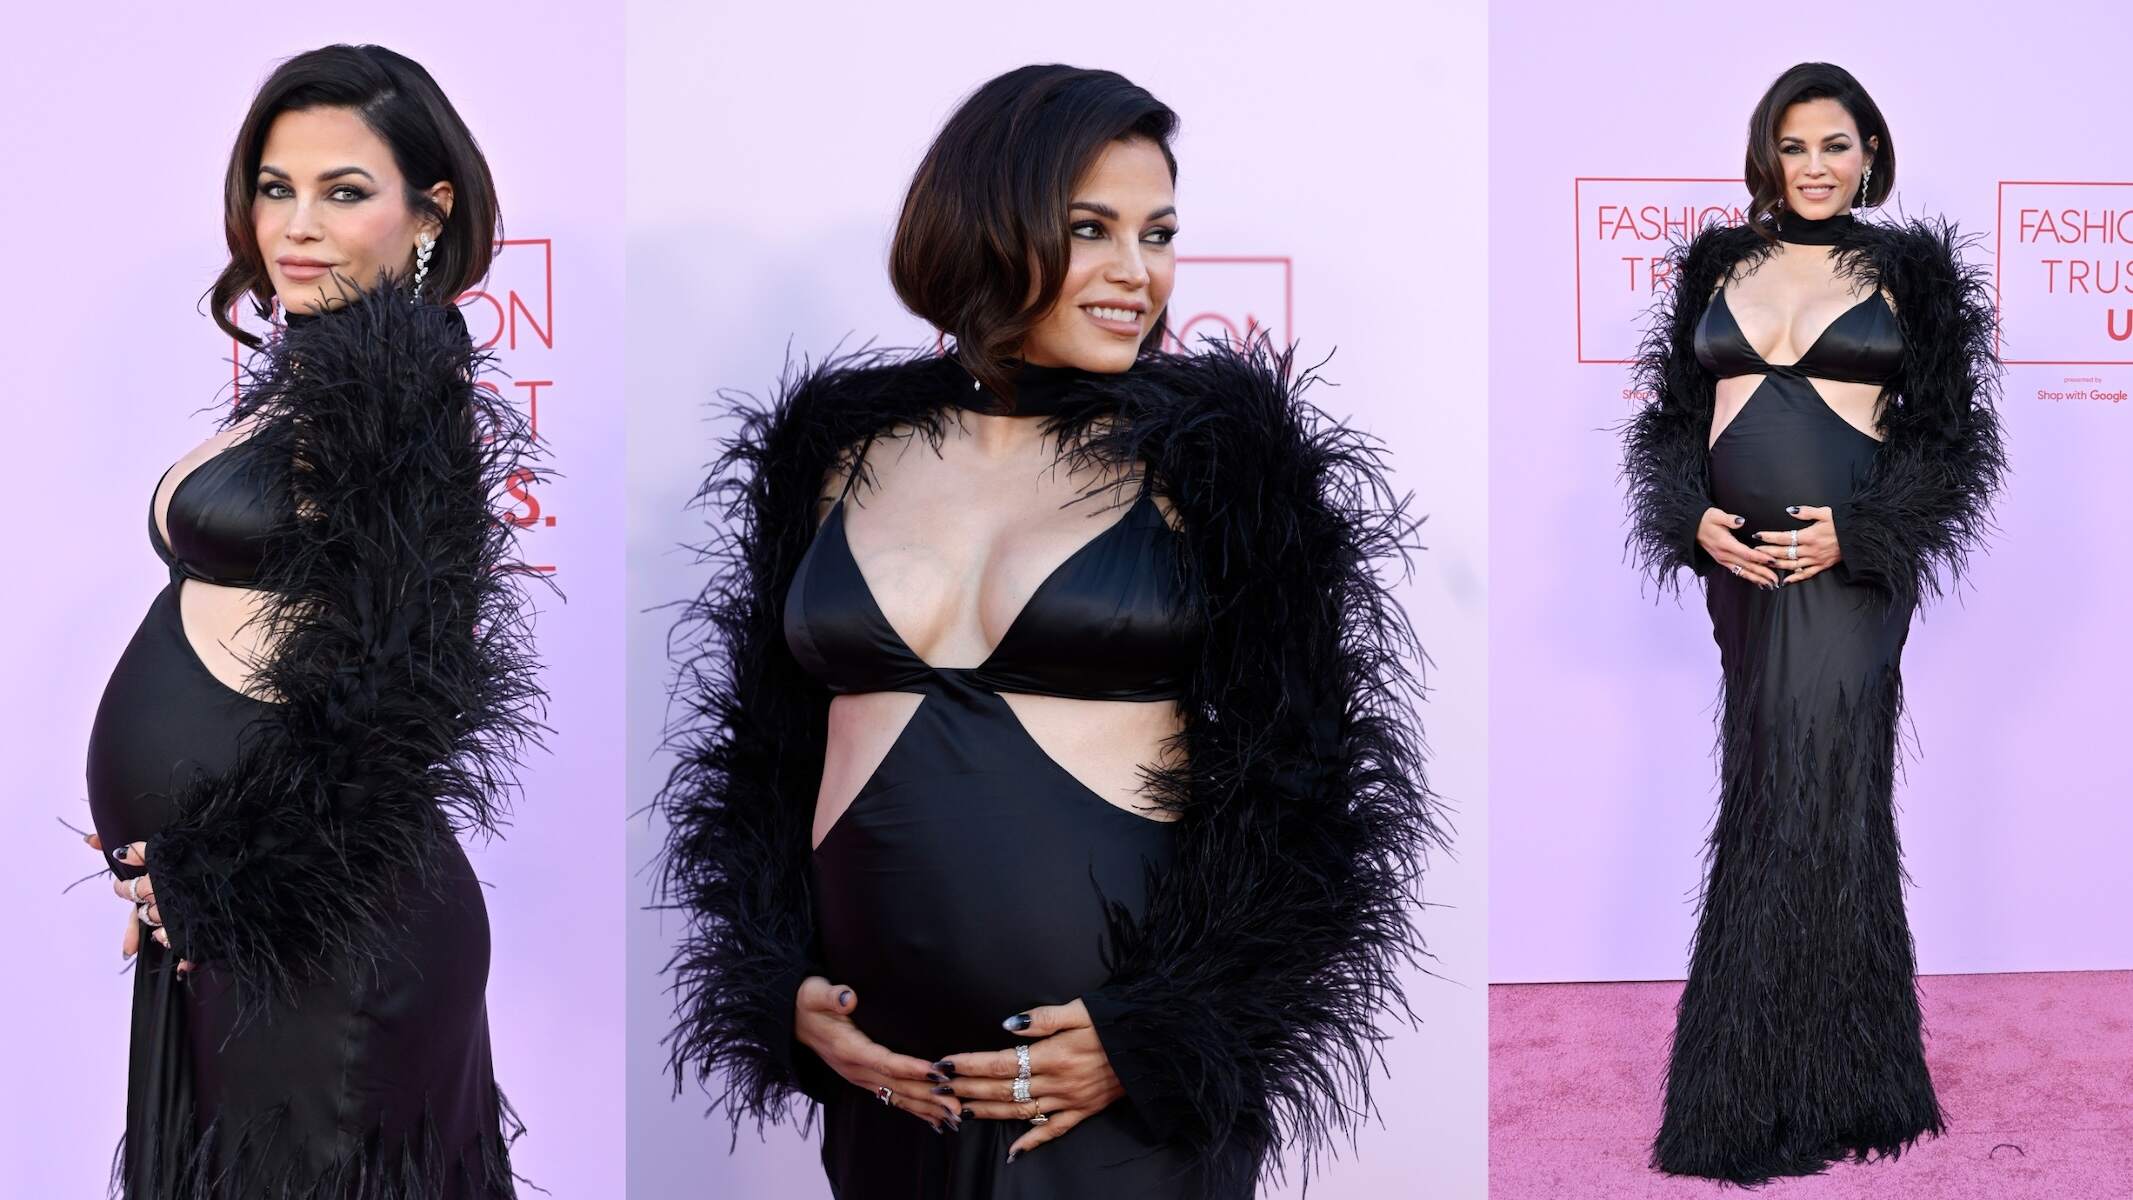 Actor Jenna Dewan smiles for cameras while wearing a black feather gown in the late stage of her pregnancy